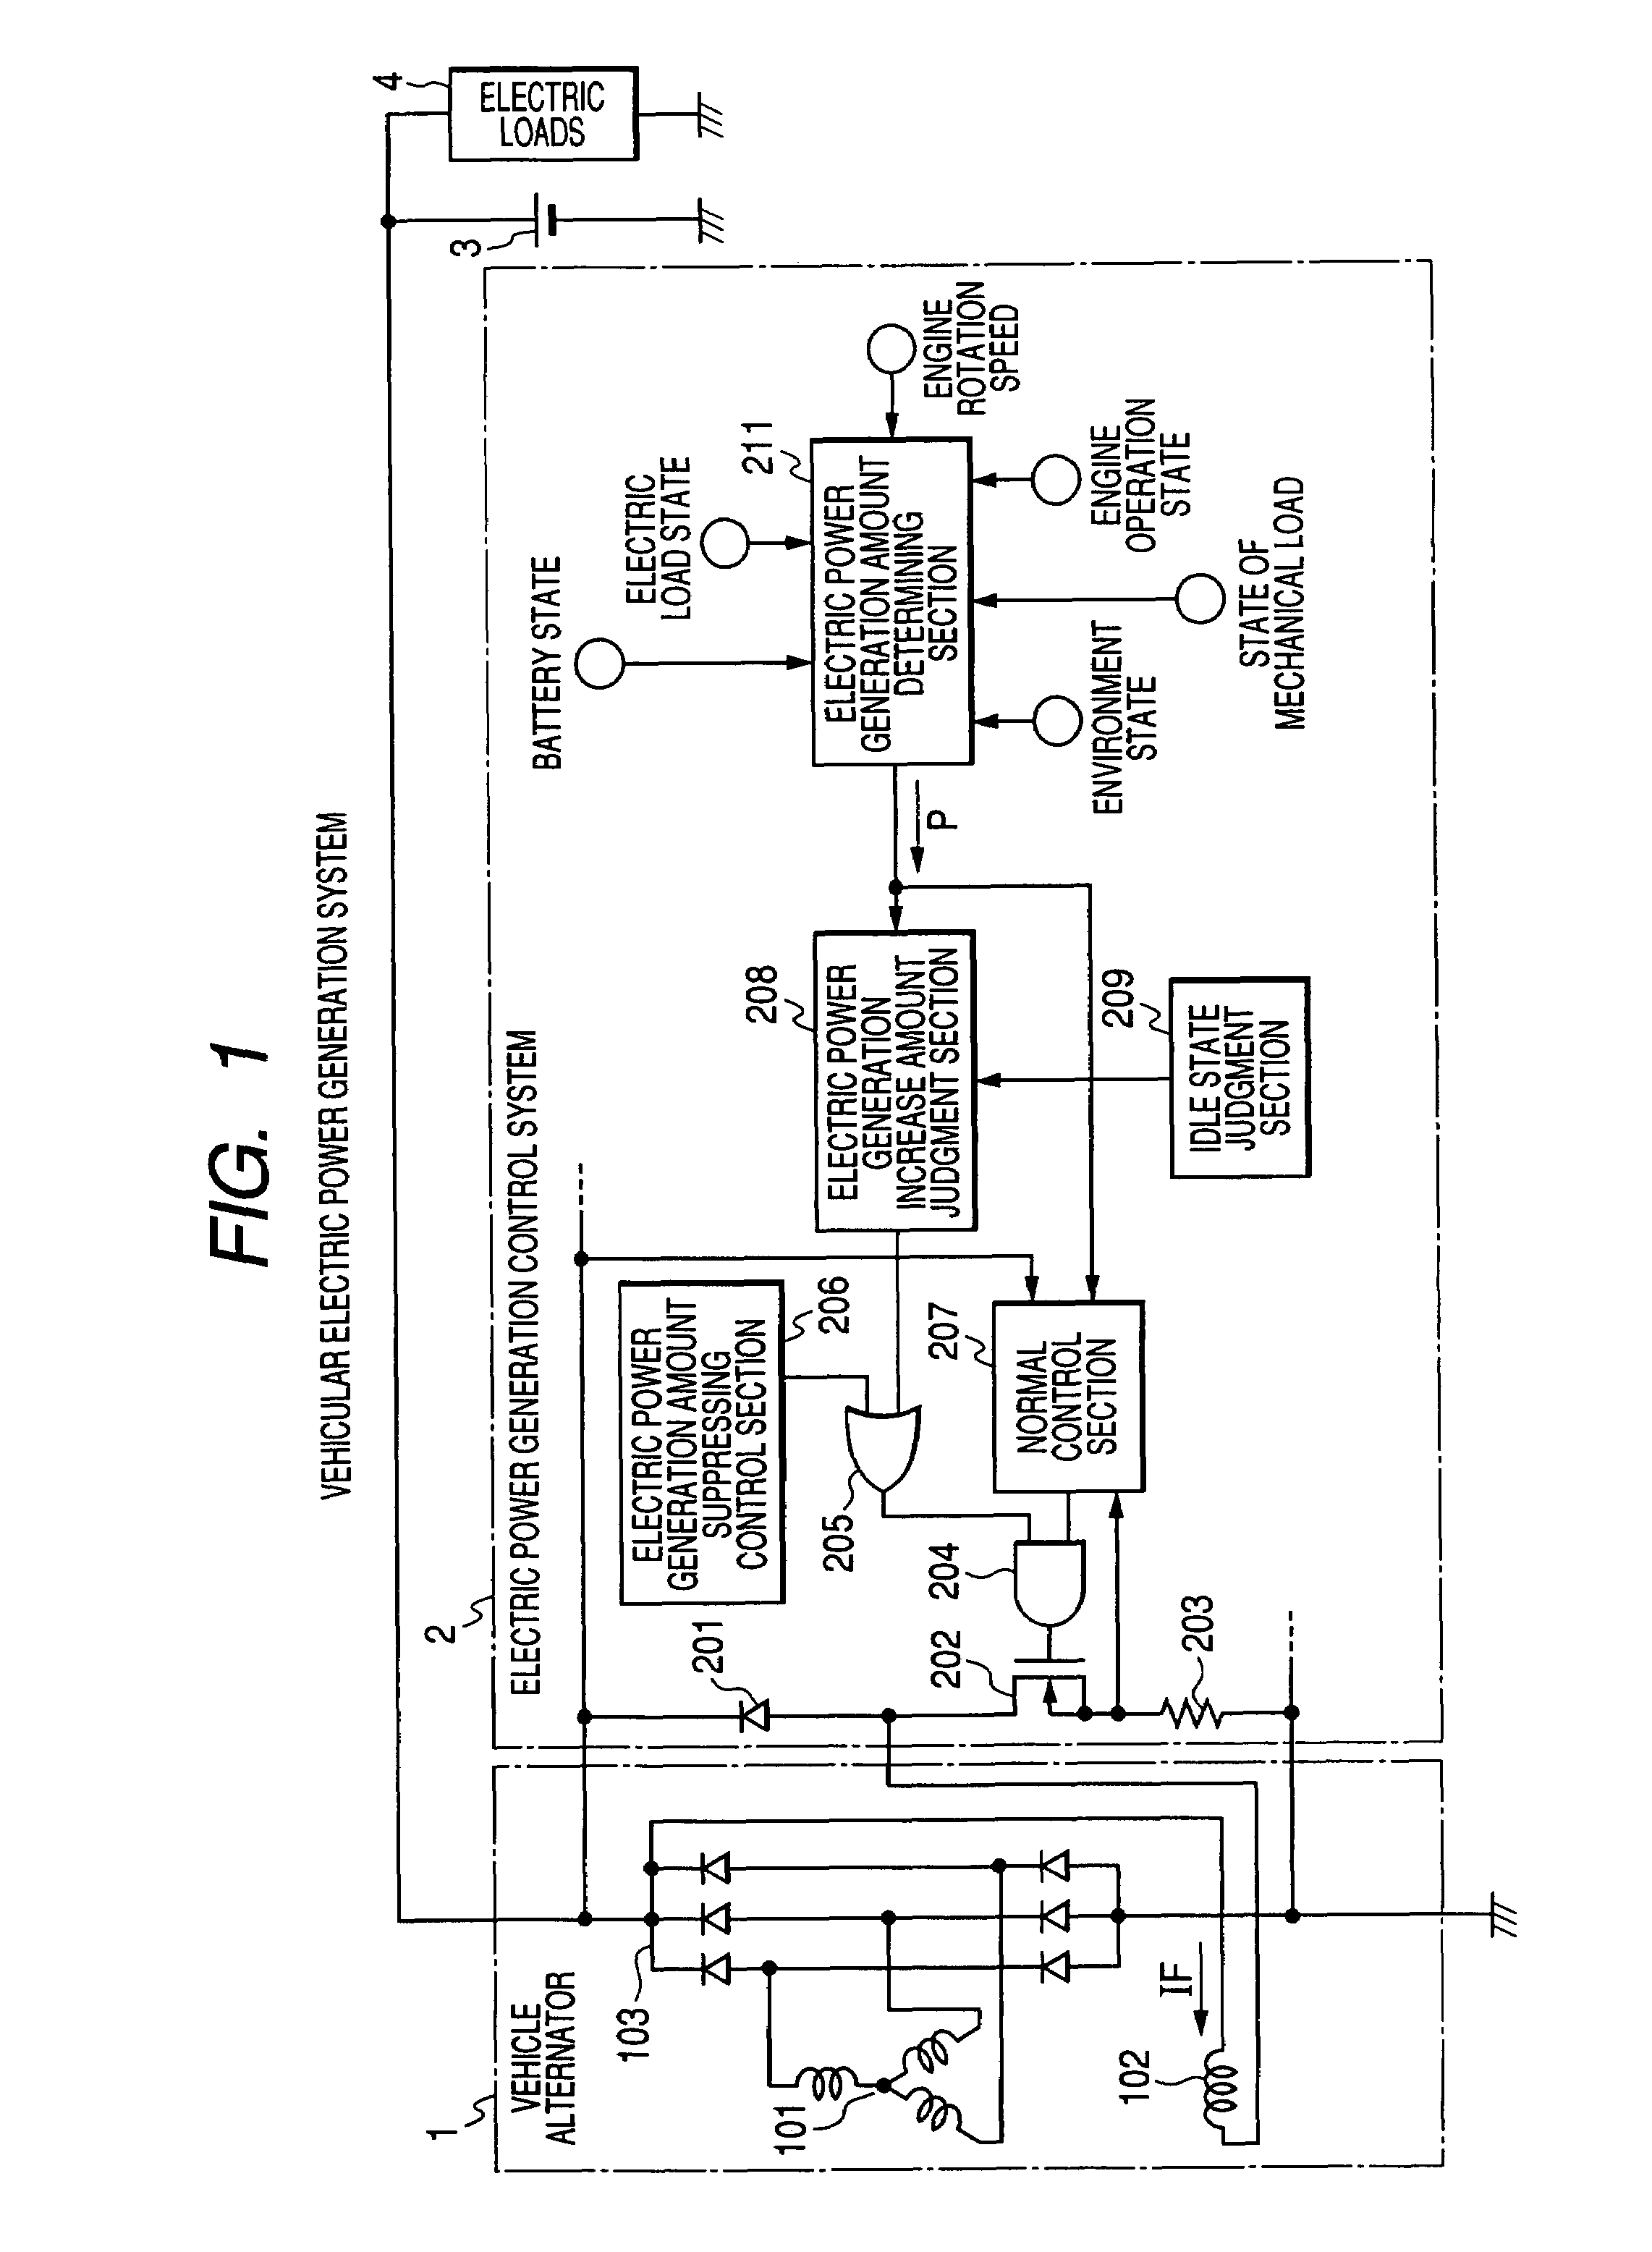 Electric power generation control system